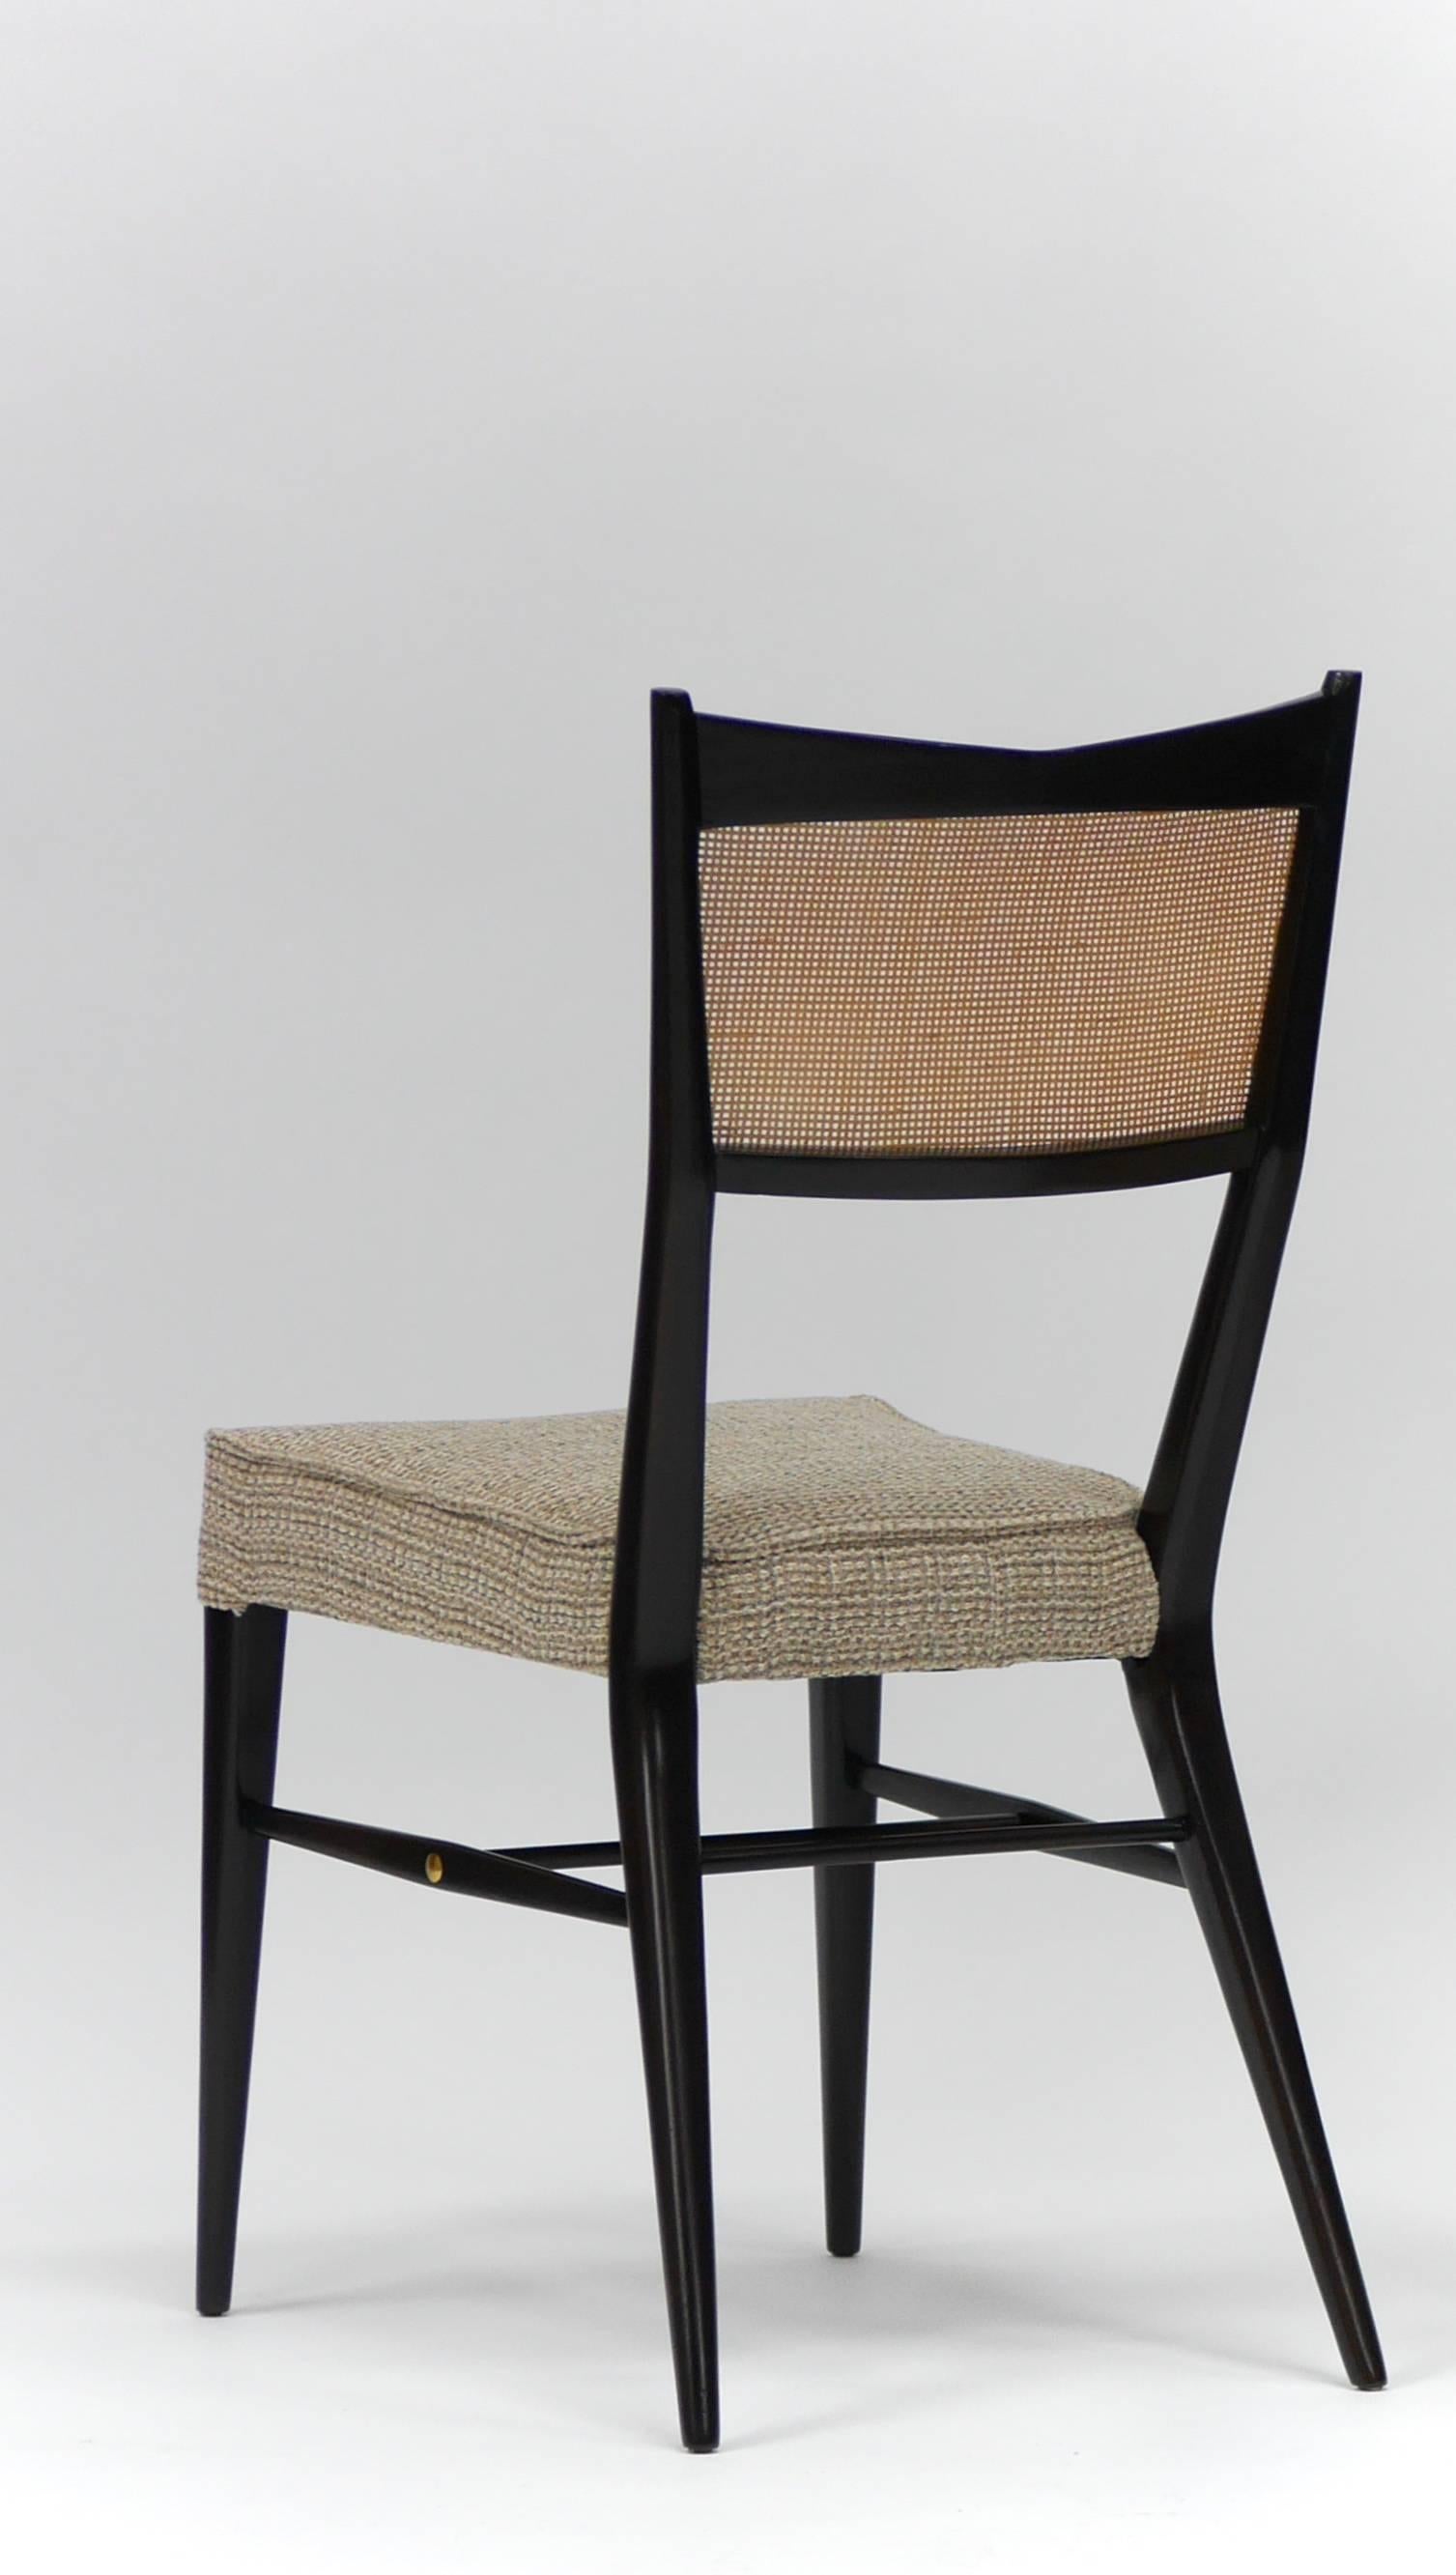 Set of 12 Paul McCobb Irwin collection dining chairs with sculpted mahogany frames and caned backs. Ten side chairs, two armchairs. Refinished and re caned. Upholstery shown is for reference only, chairs are stripped and are ready for client's